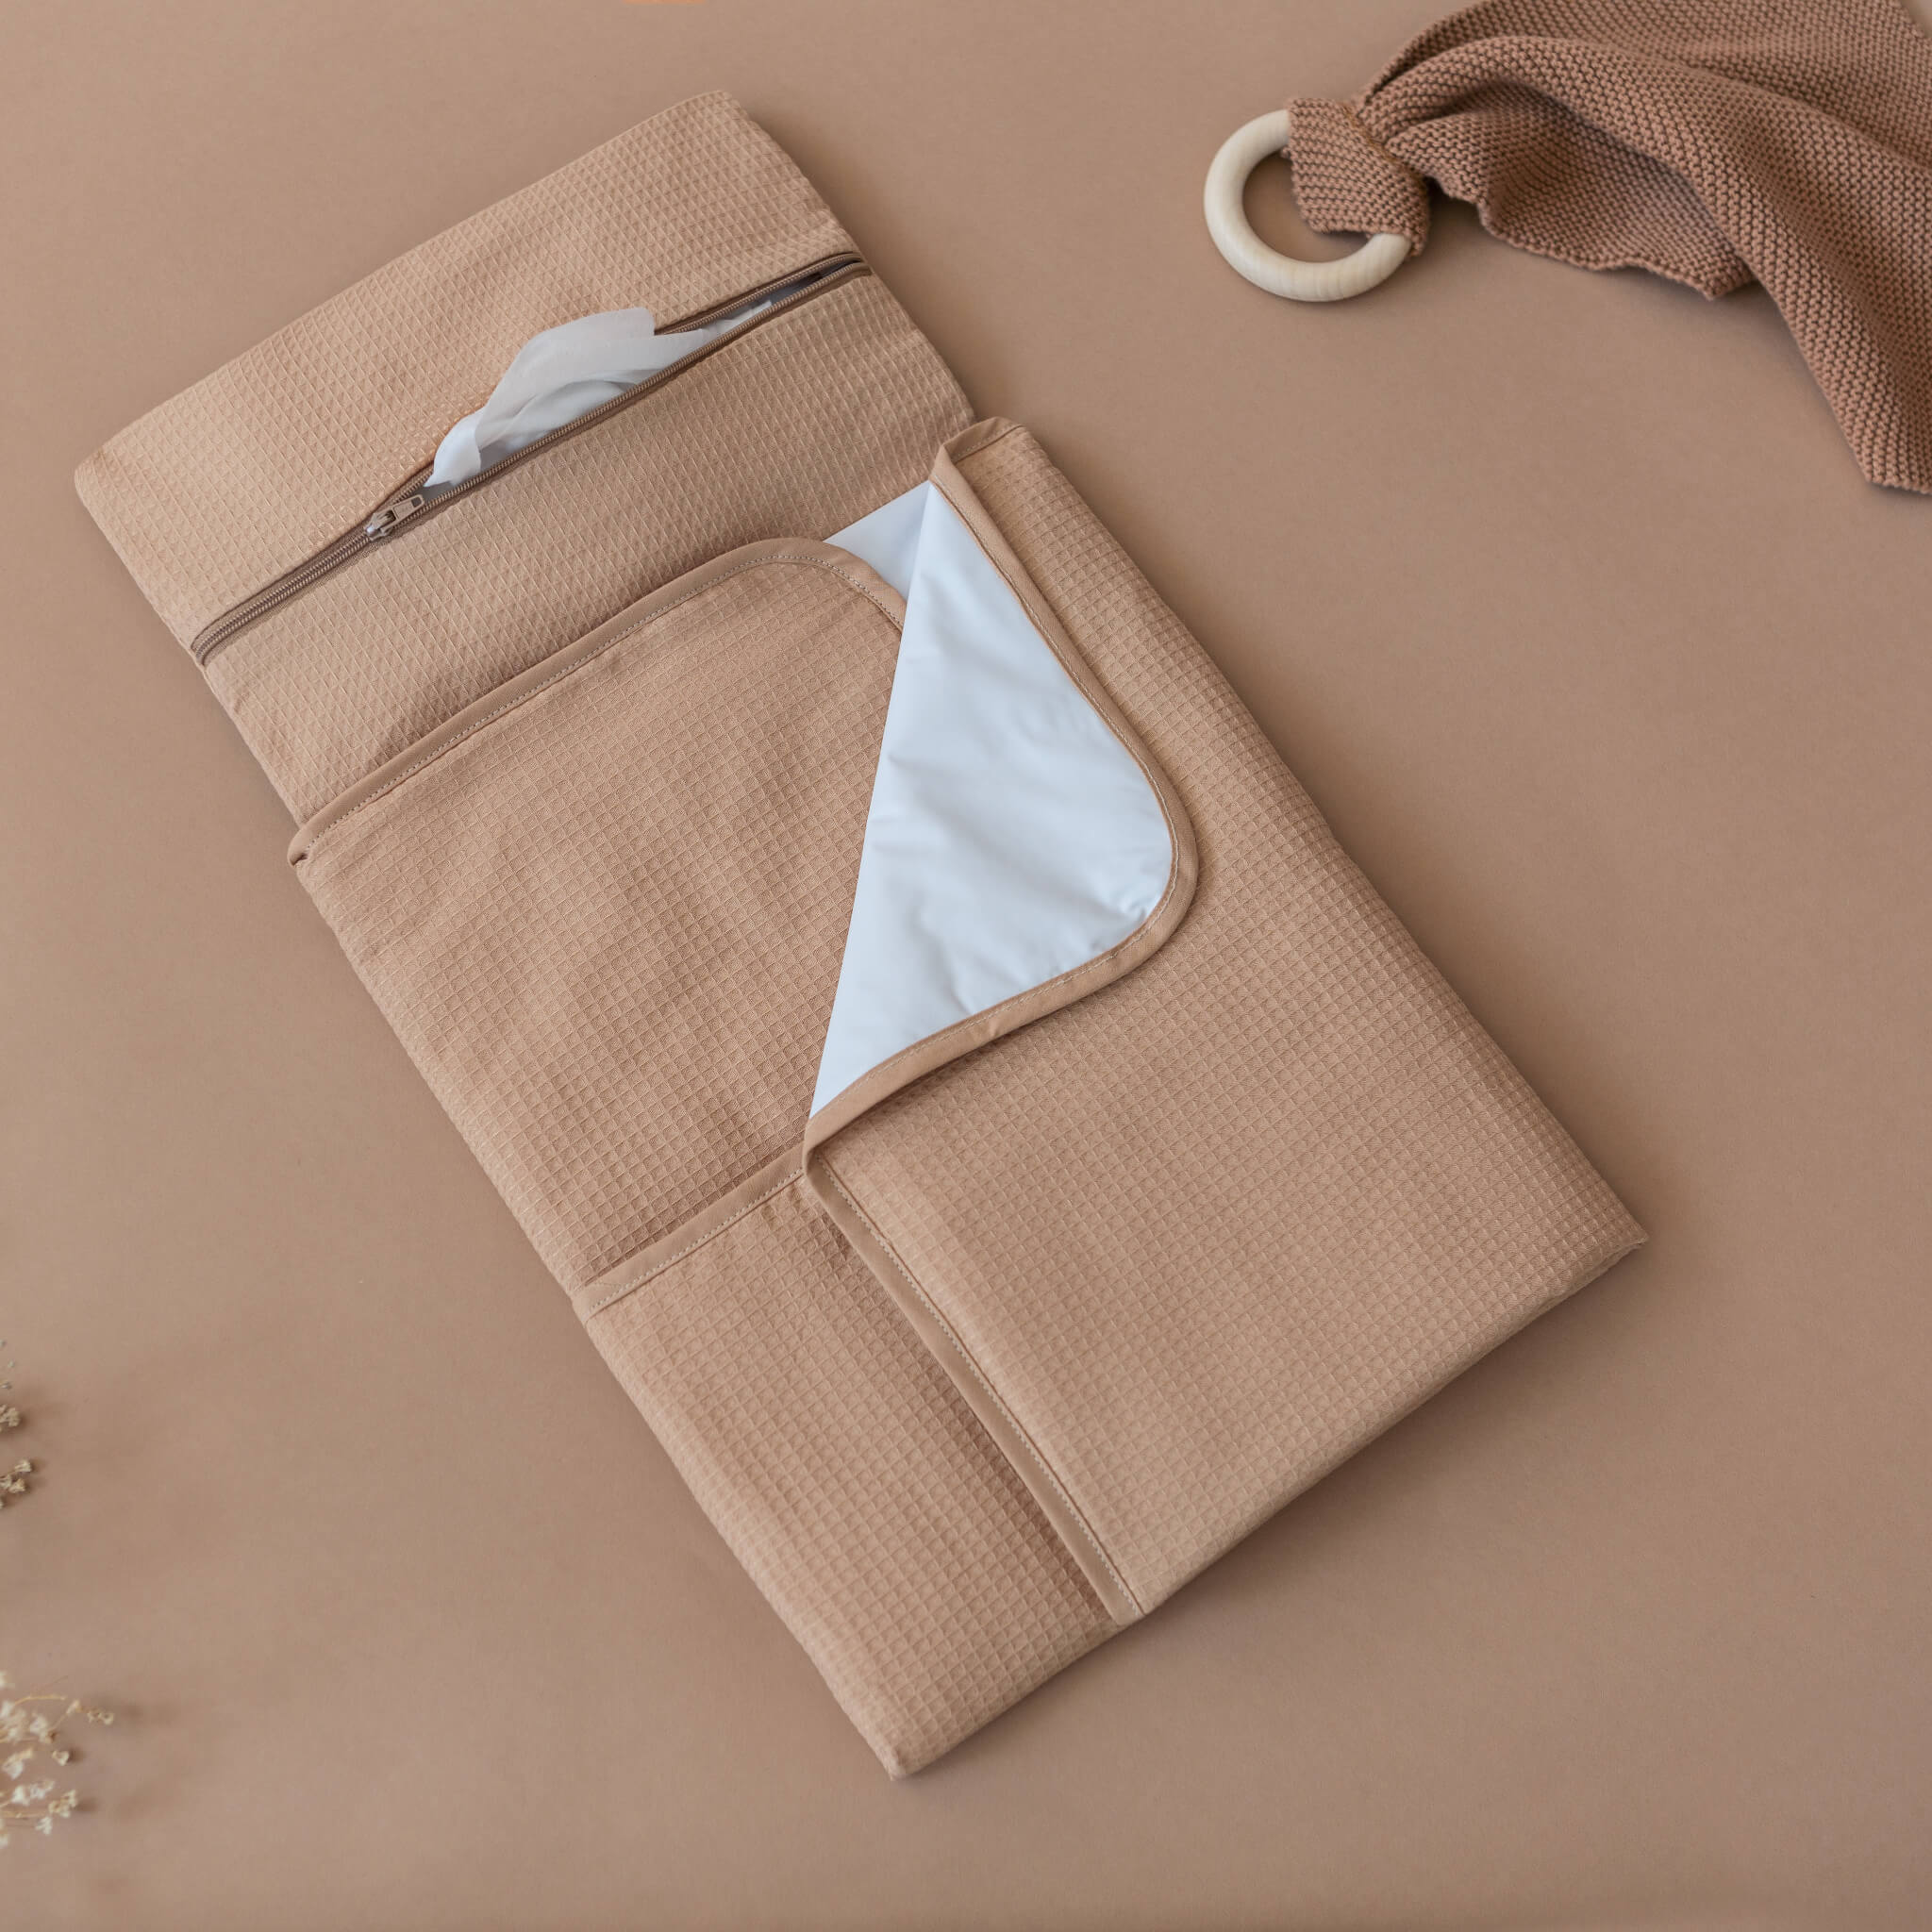 Nobodinoz Mozart Changing Pad in Nude